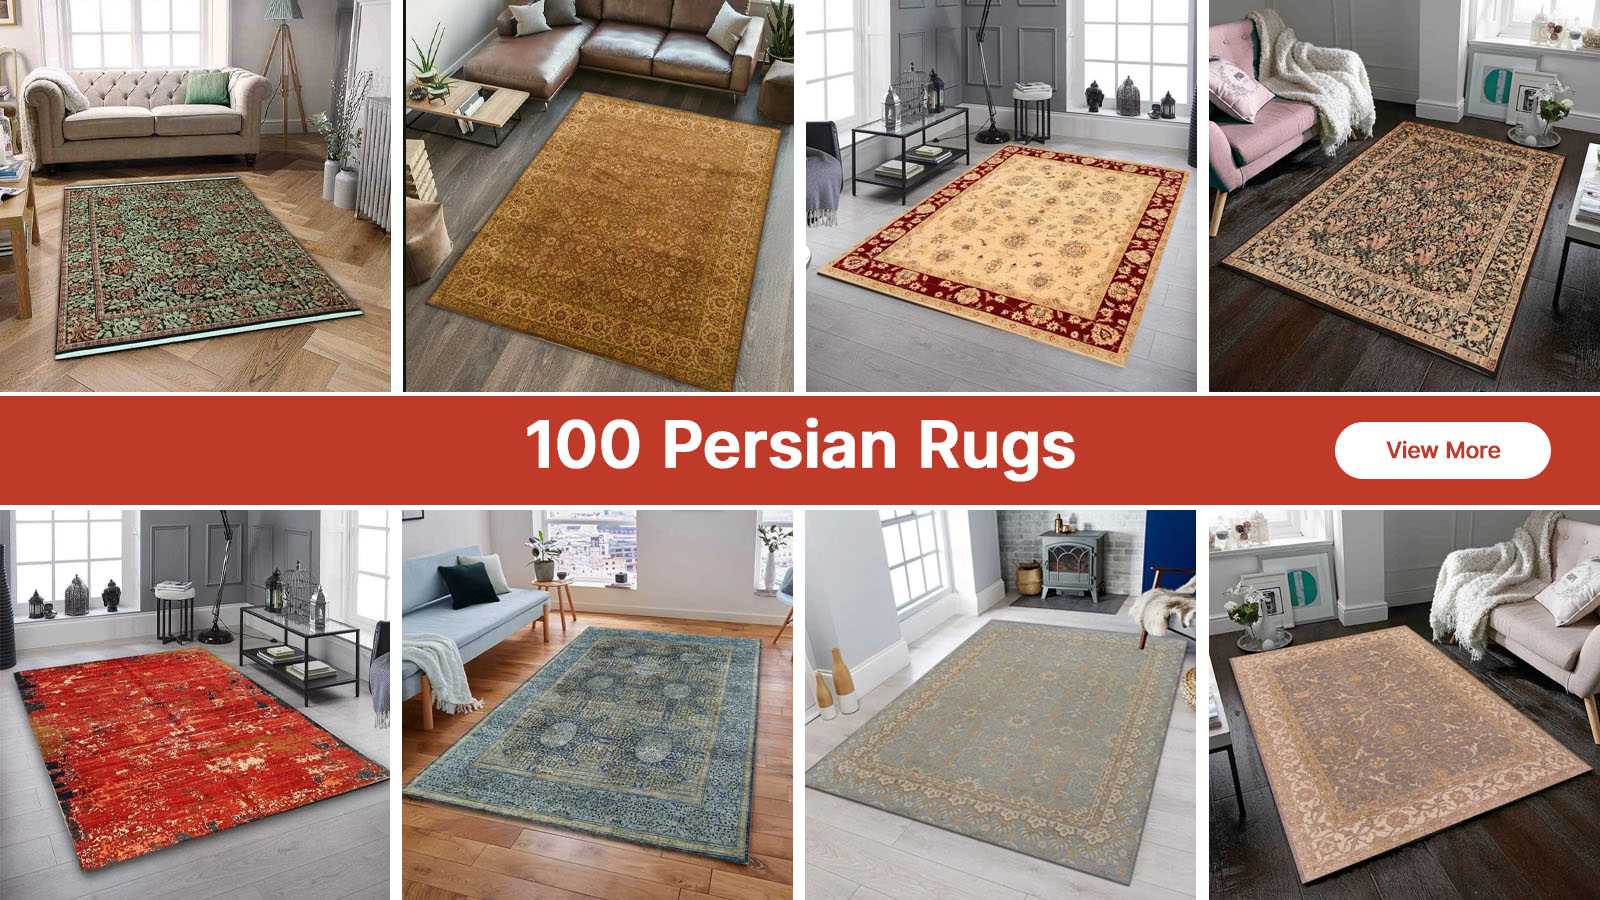 How to clean an area rug: an expert guide